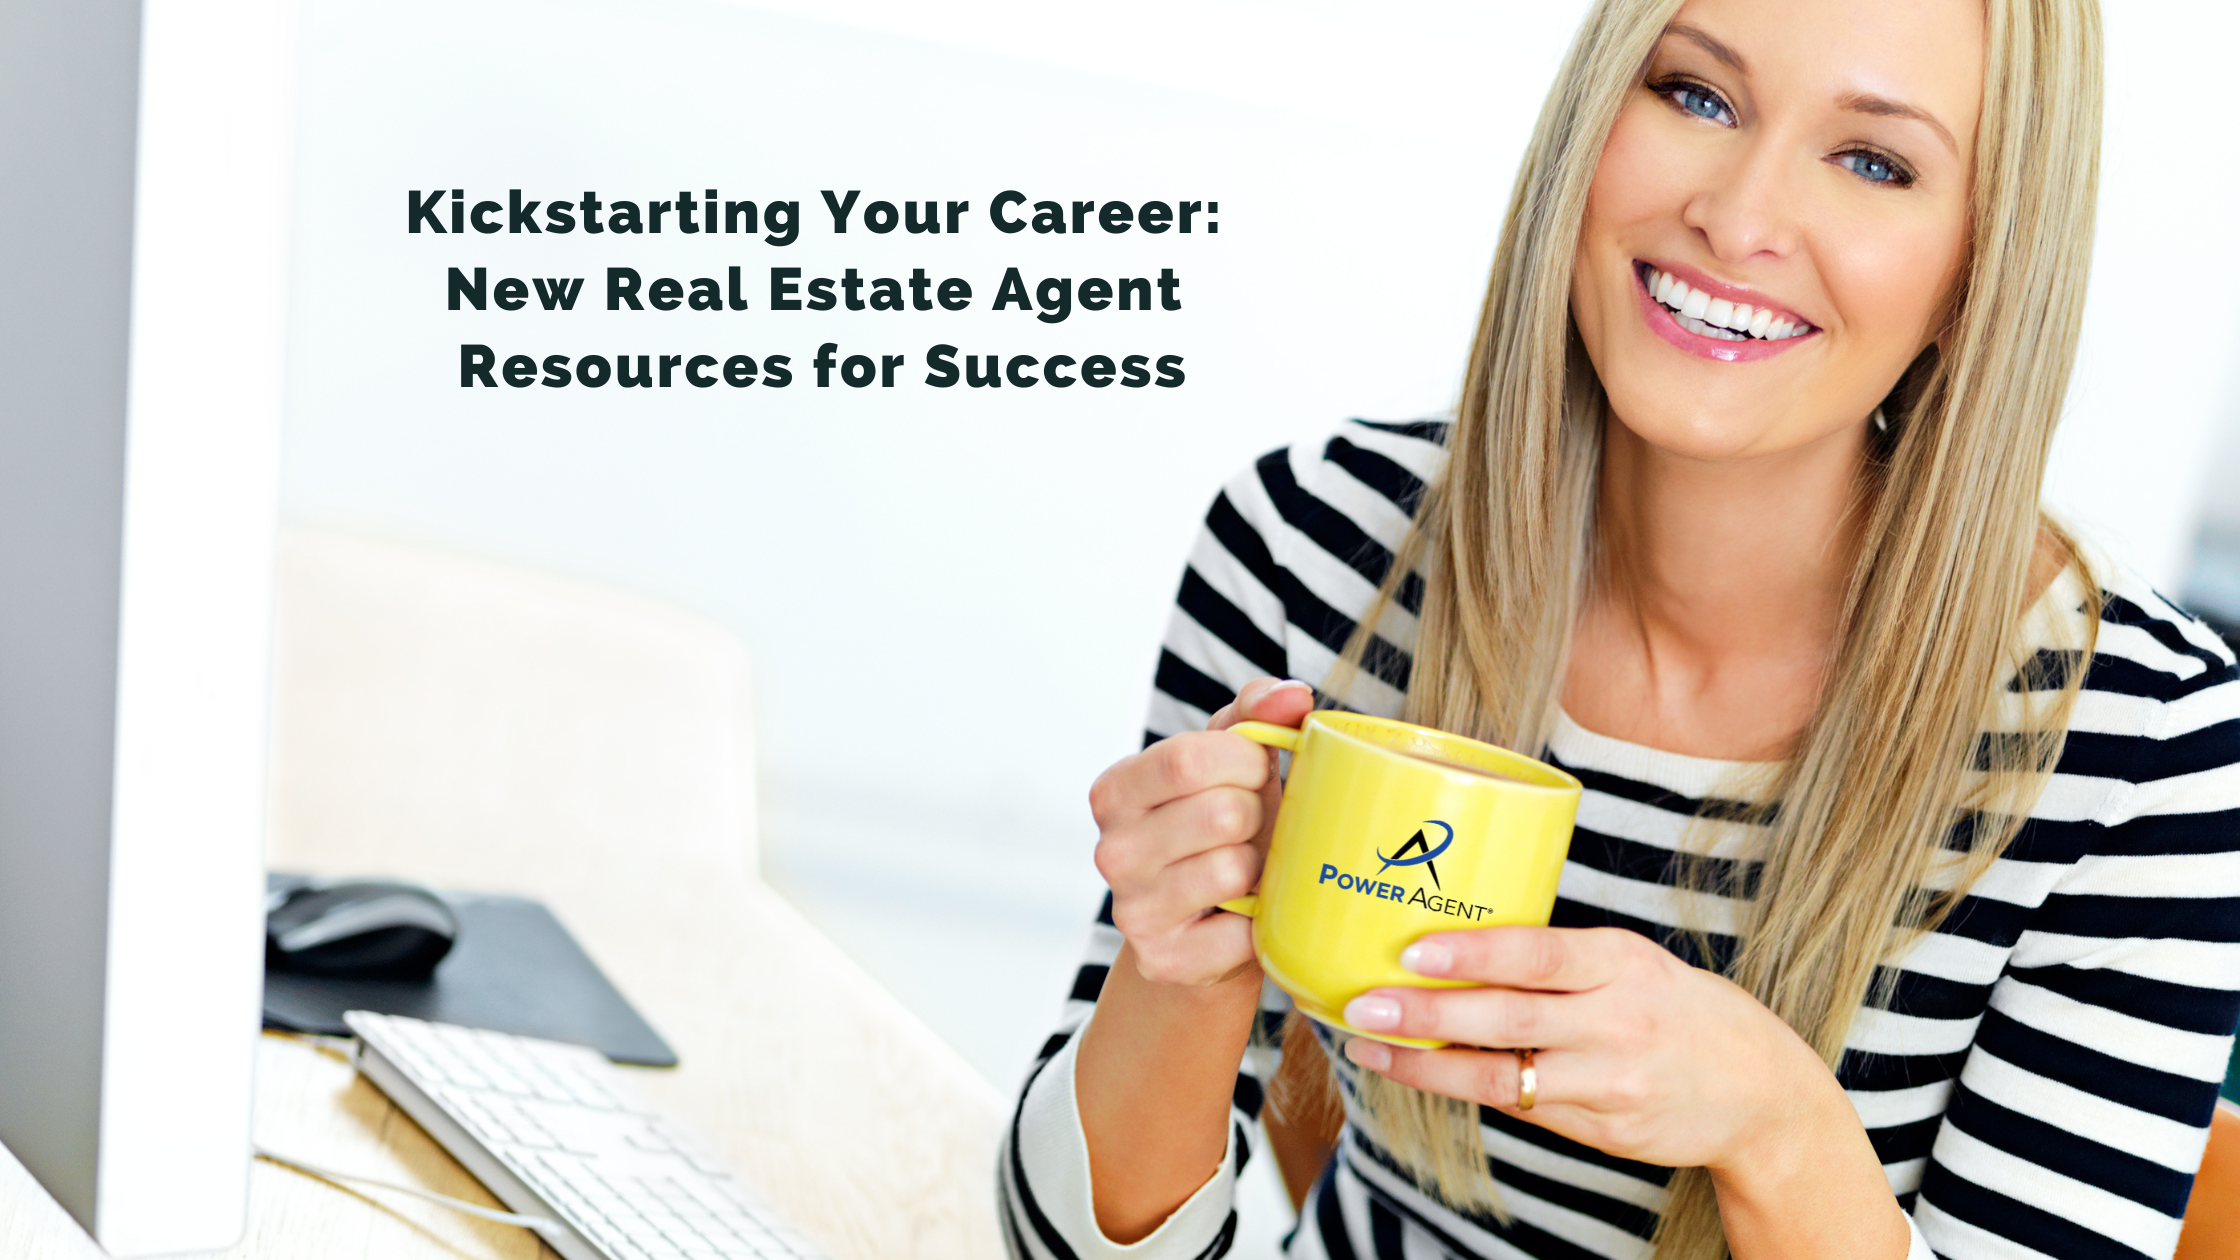 Kickstarting Your Career: New Real Estate Agent Resources for Success